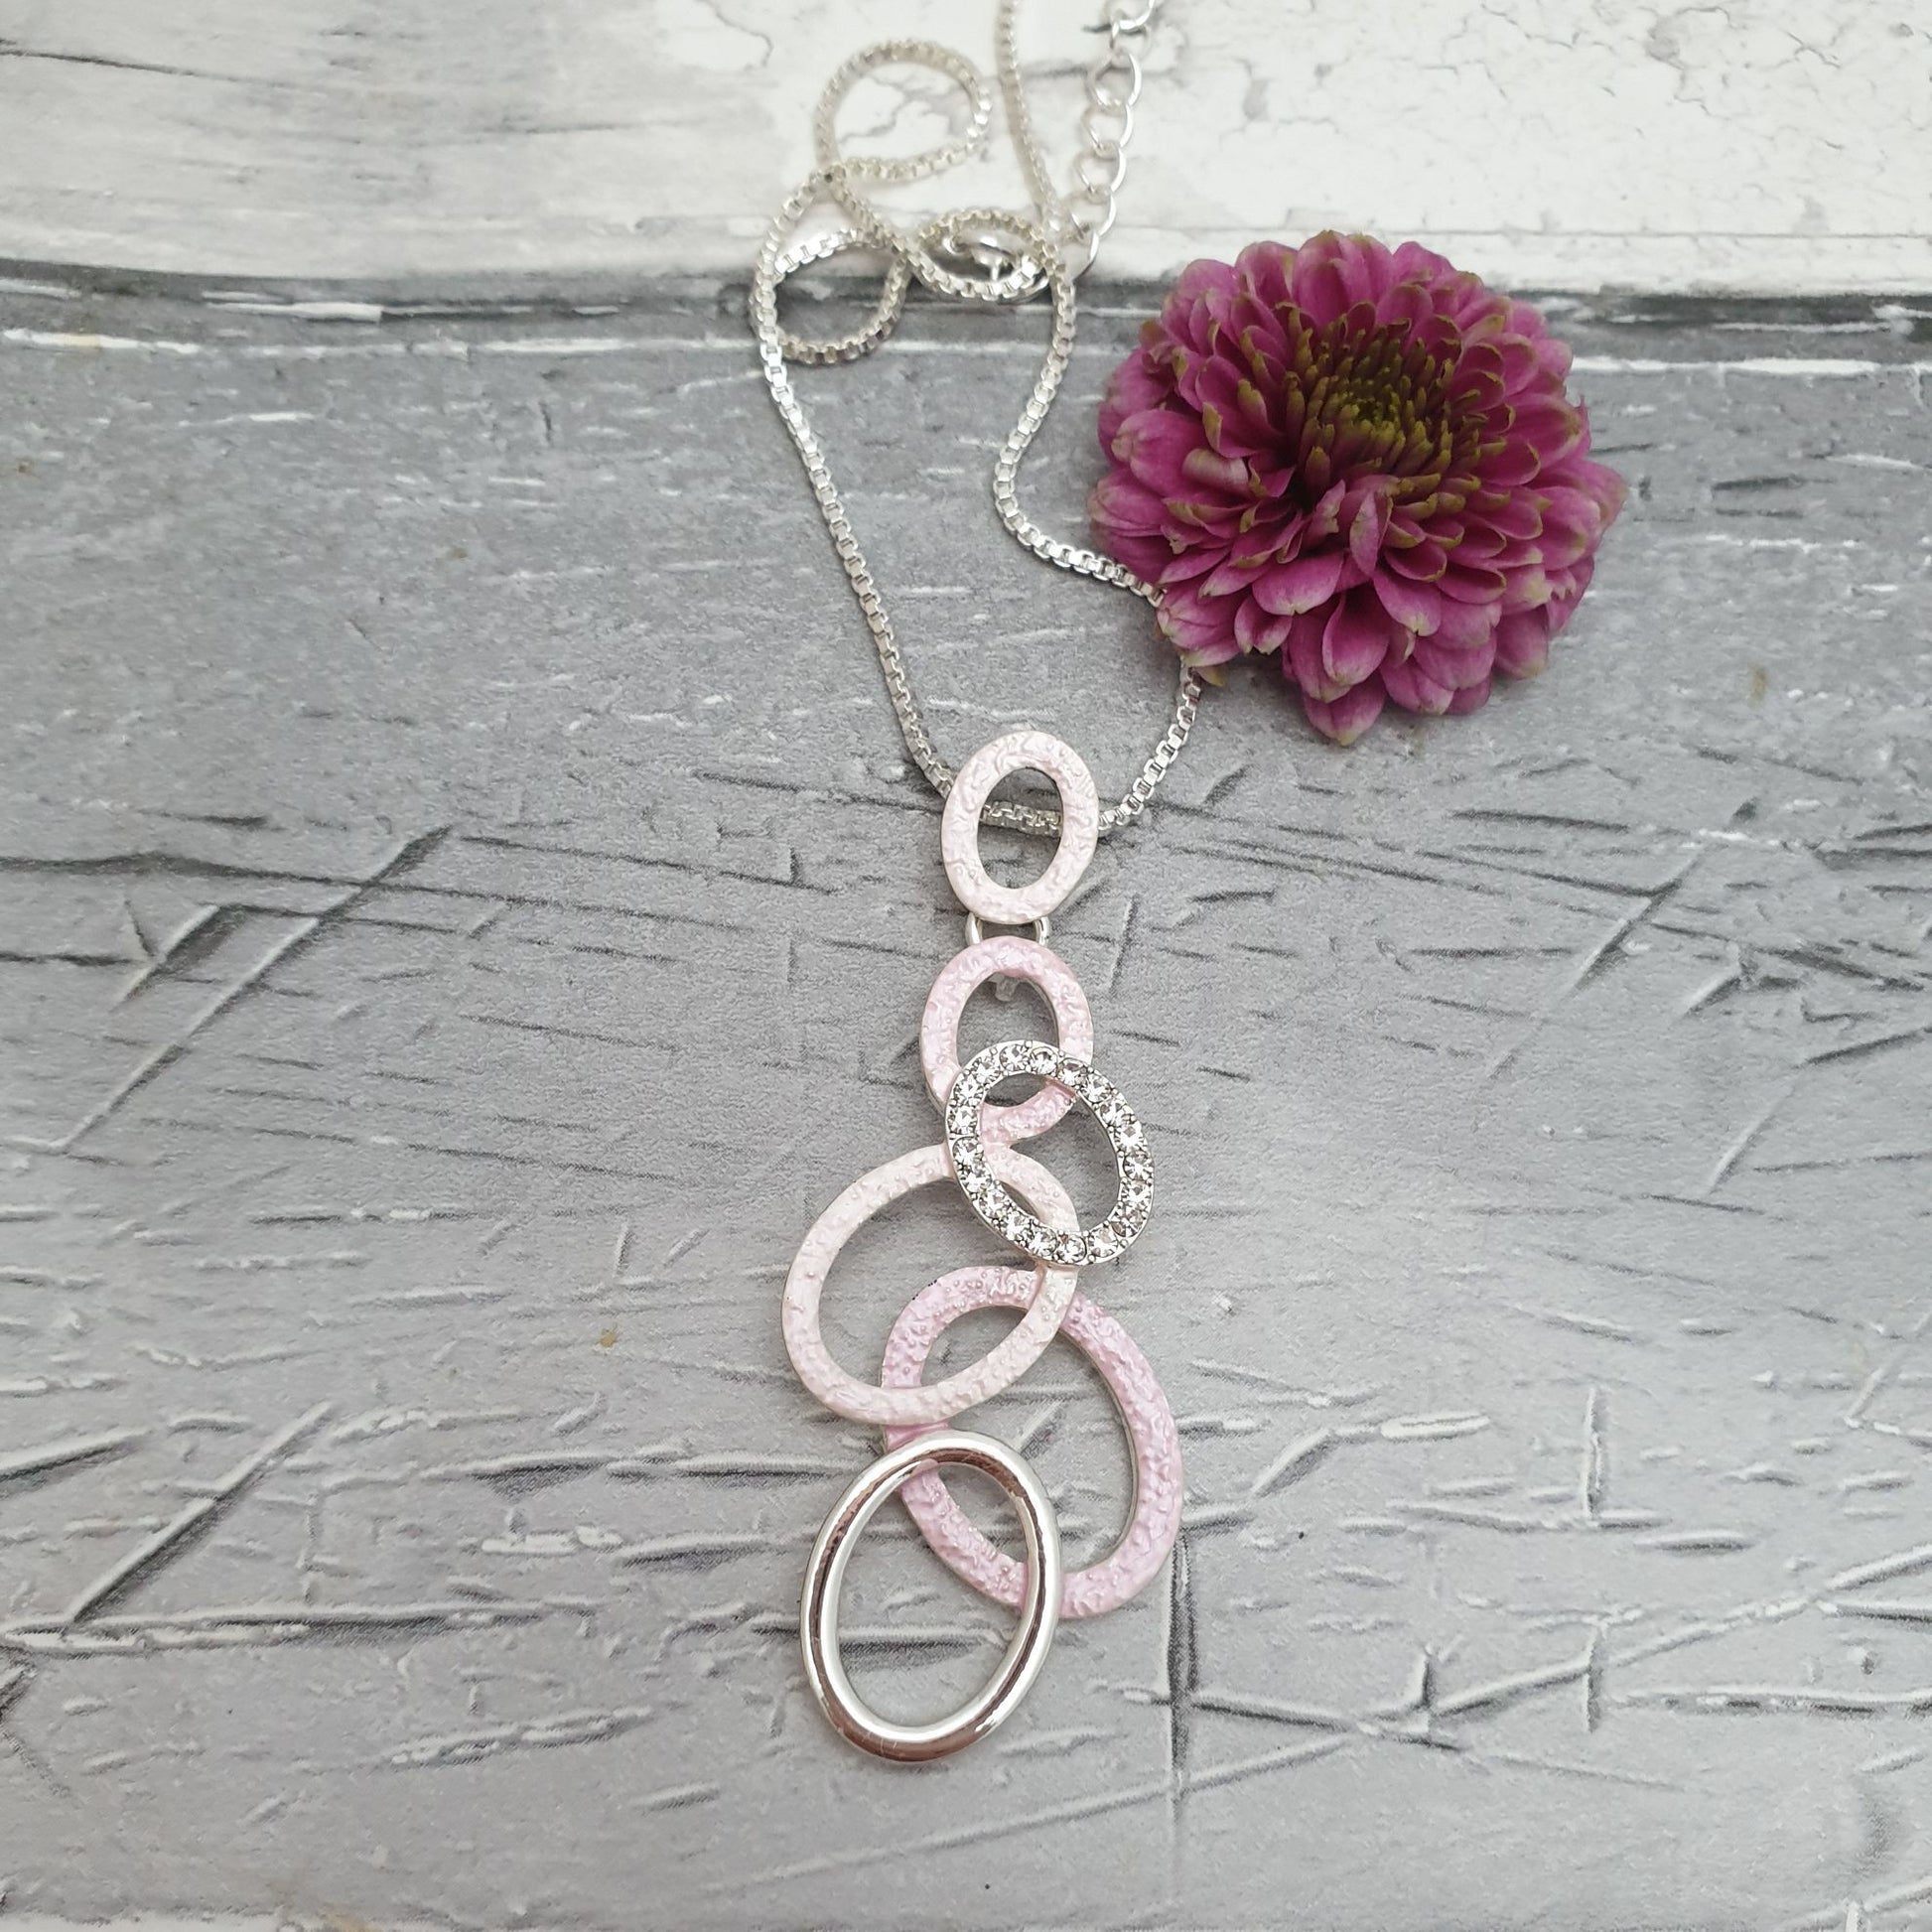 Photo of a necklace decorated with a cascade of pink and silver hoops